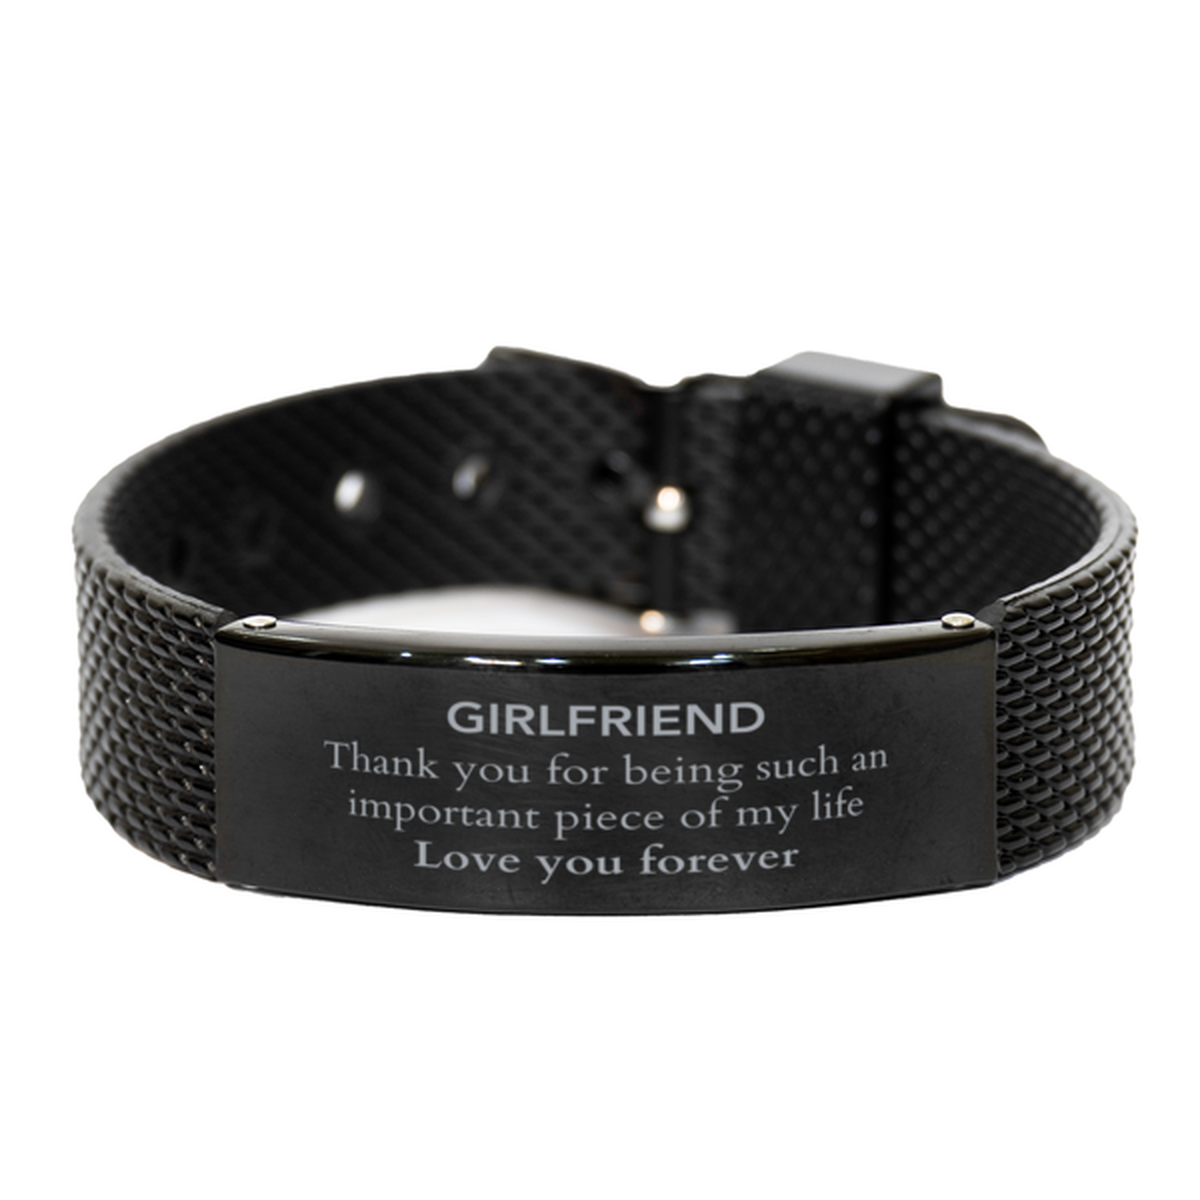 Appropriate Girlfriend Black Shark Mesh Bracelet Epic Birthday Gifts for Girlfriend Thank you for being such an important piece of my life Girlfriend Christmas Mothers Fathers Day